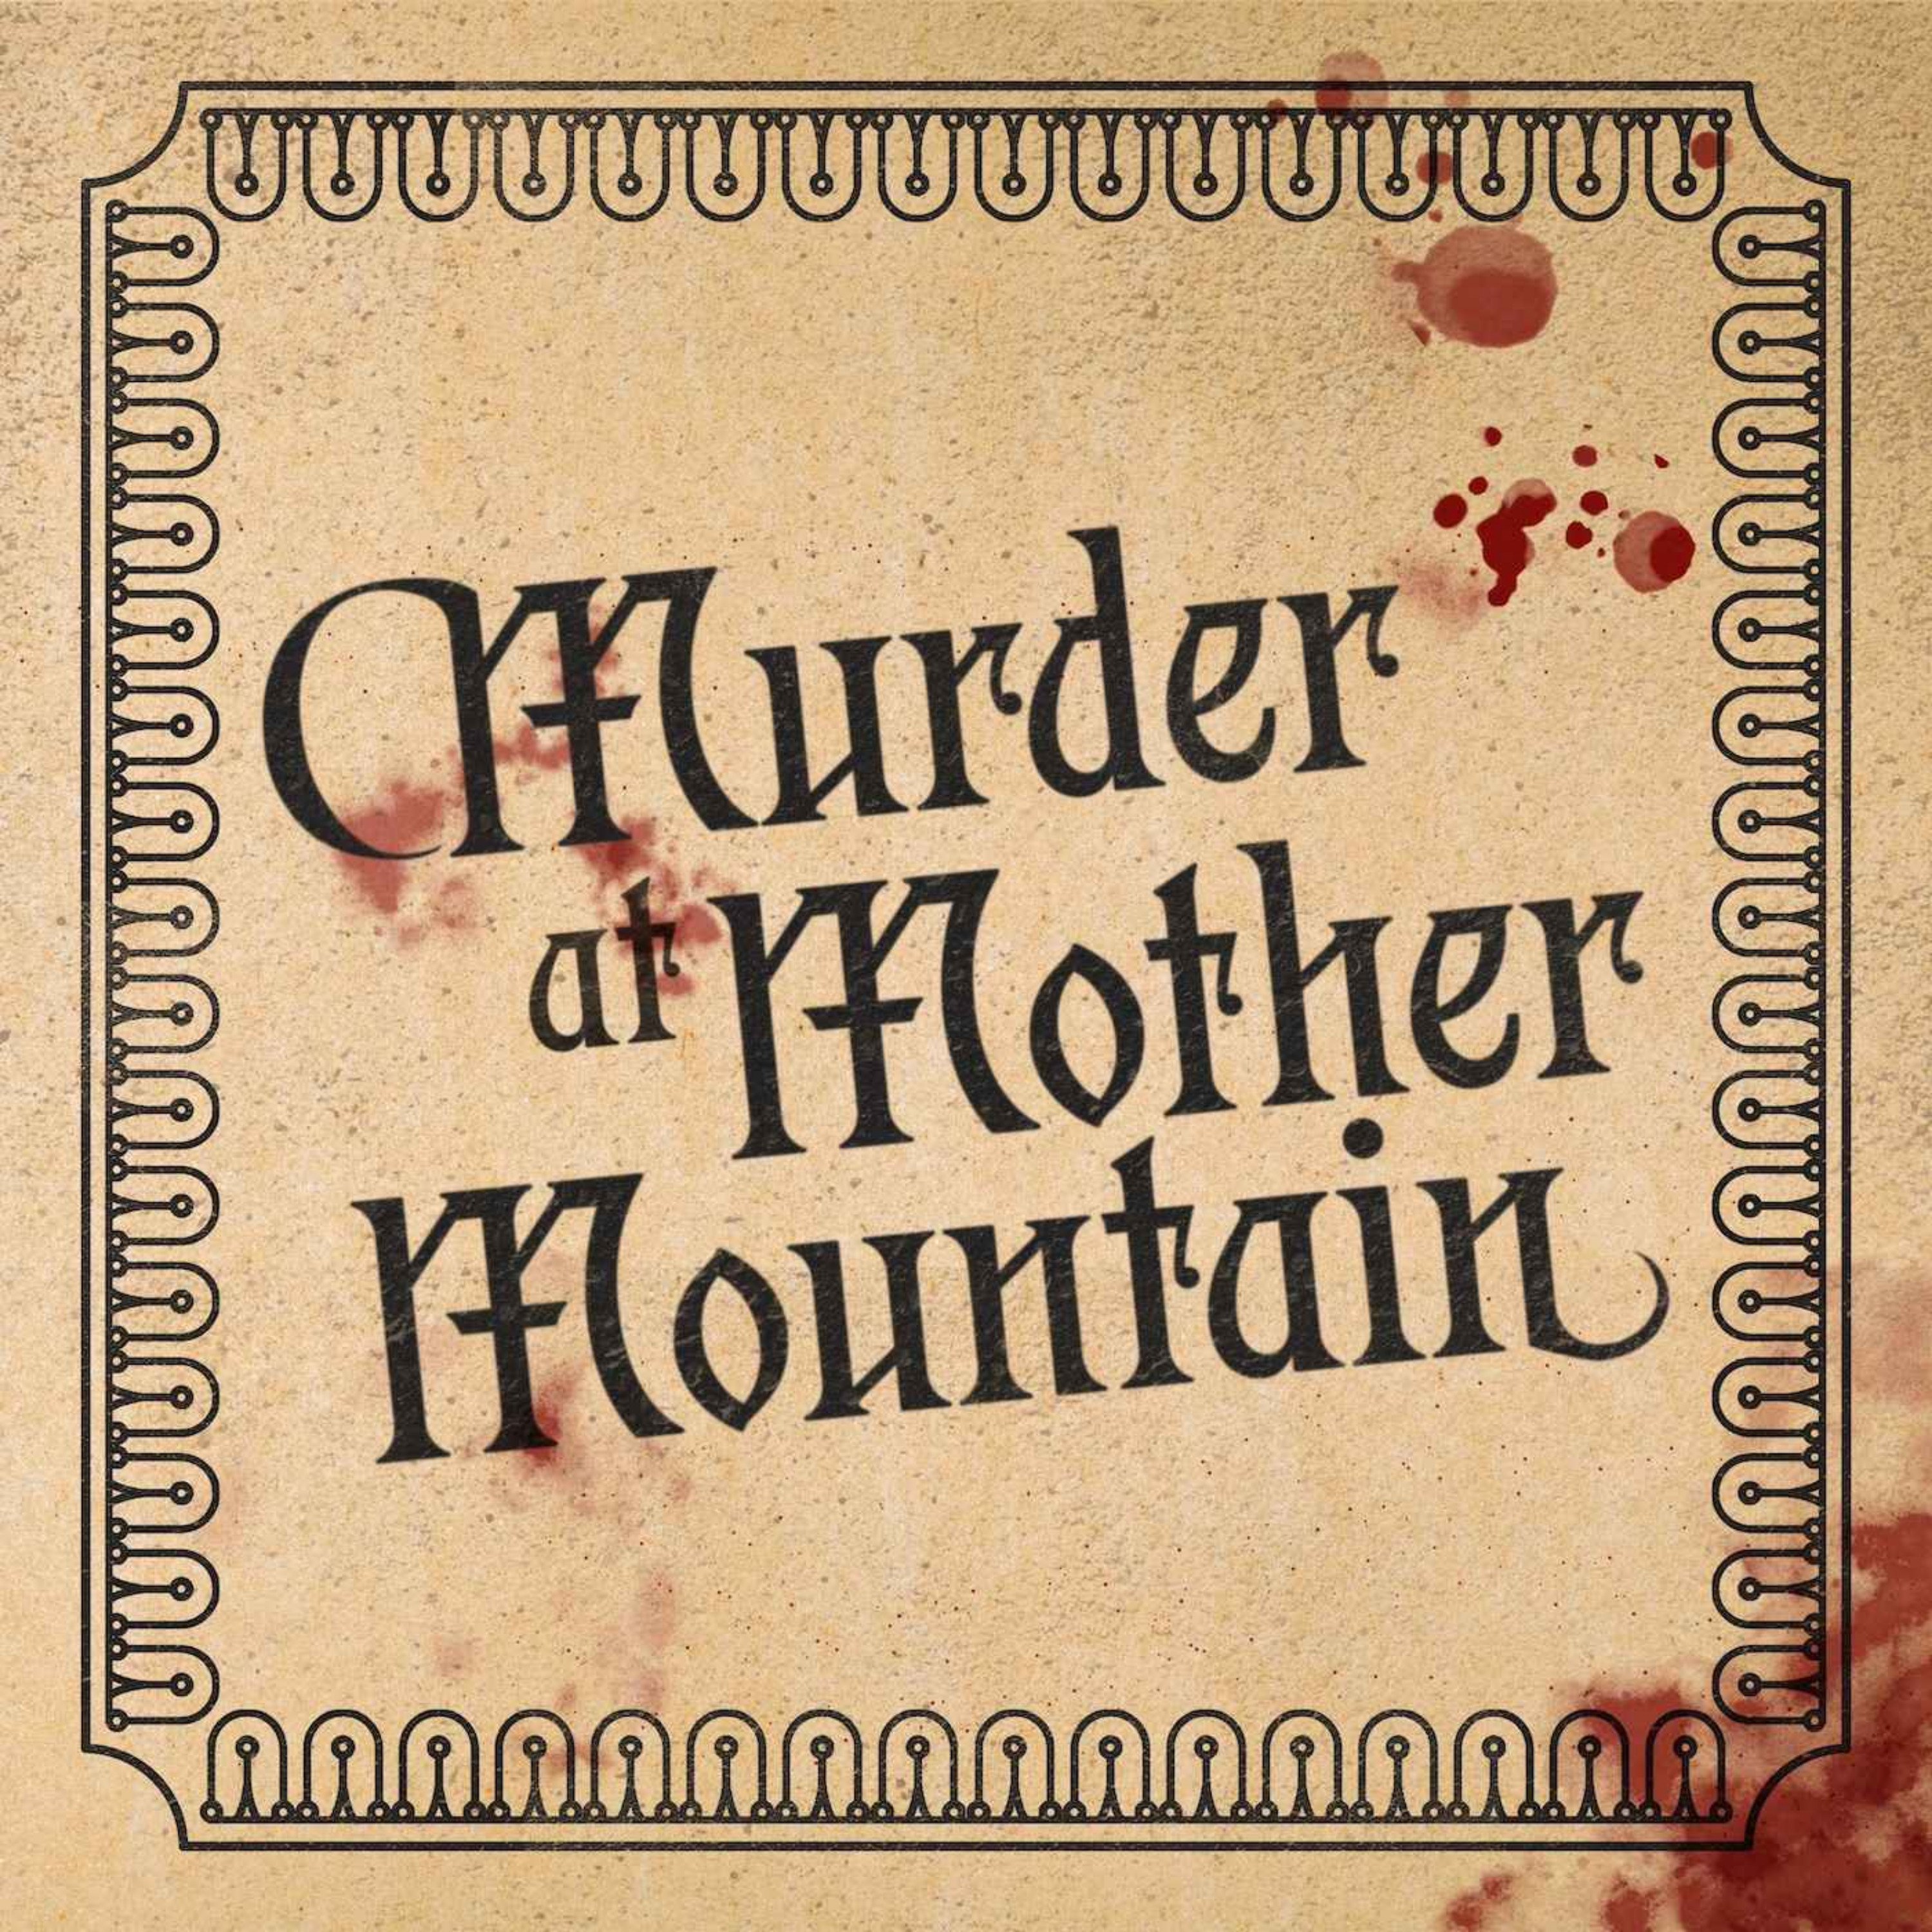 New Series - Murder at Mother Mountain Coming June 20th